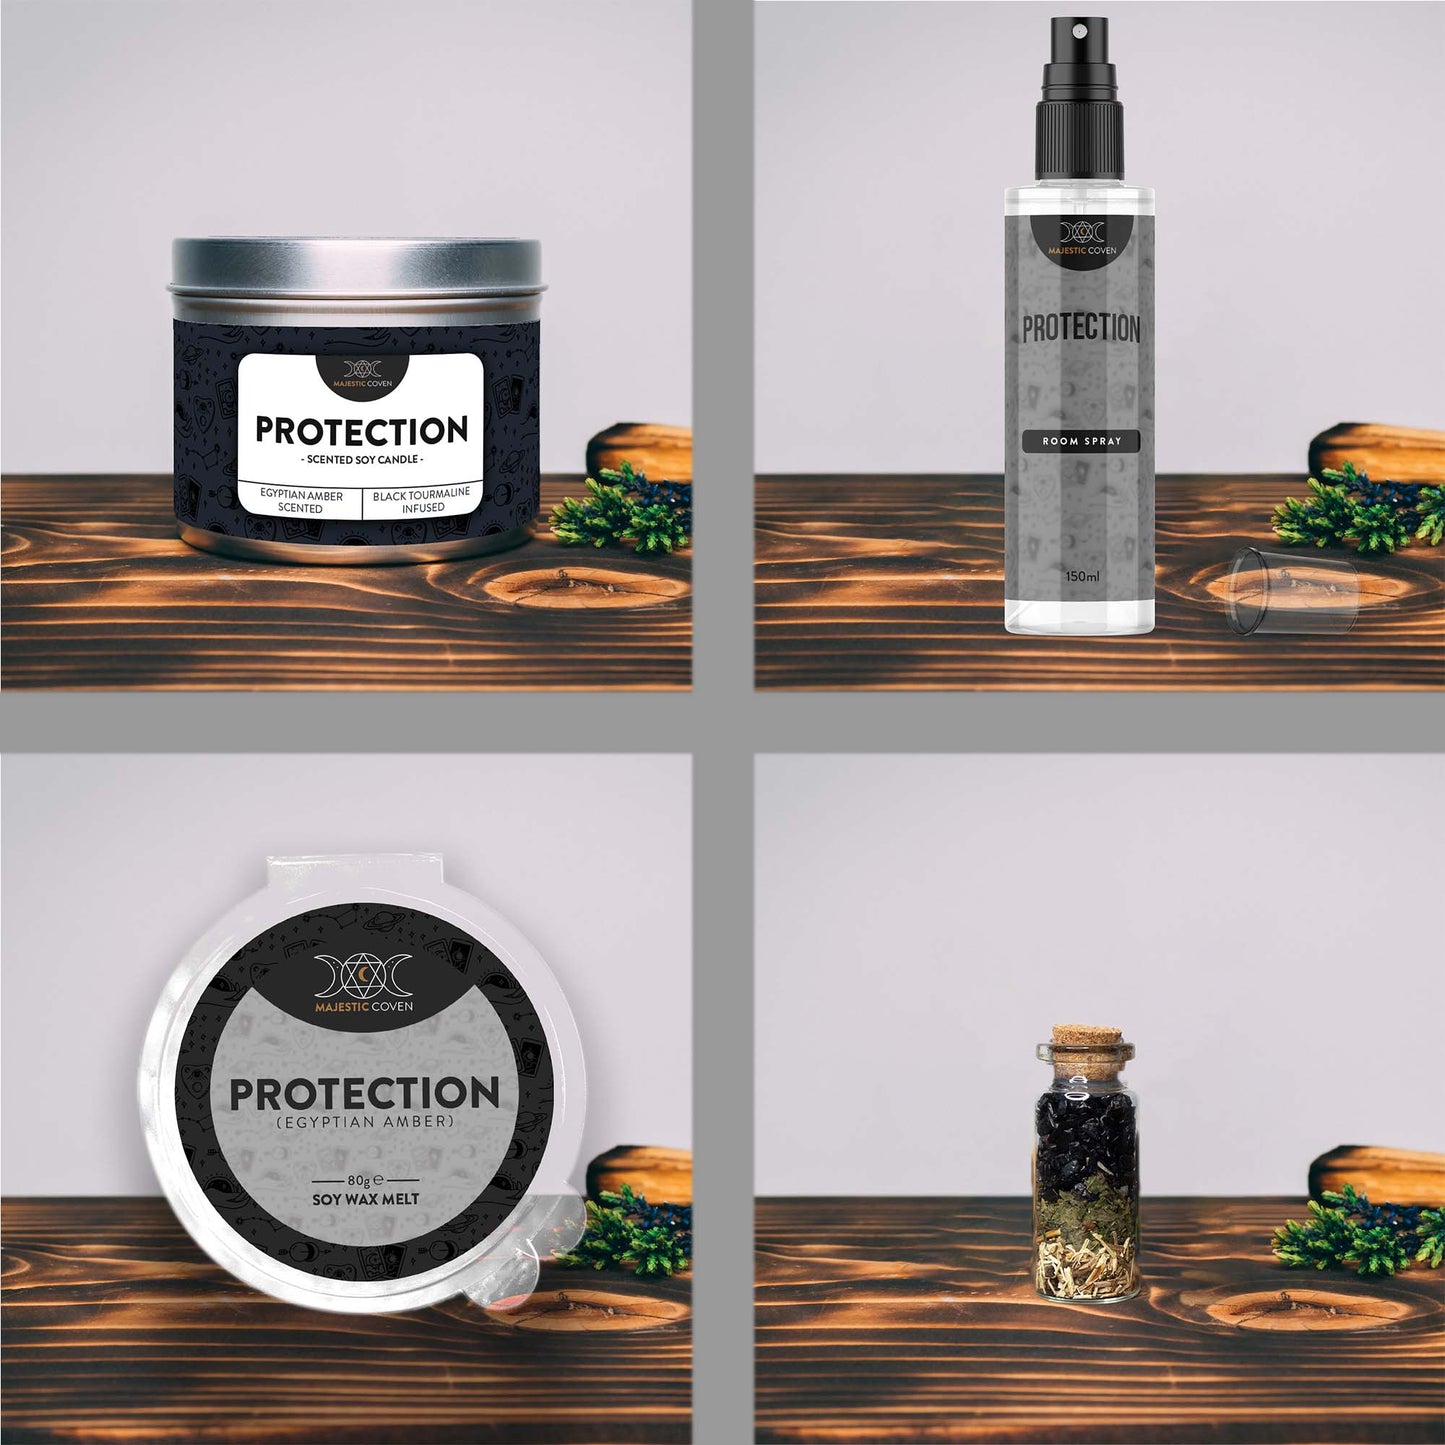 The Protection Bundle Majestic Coven